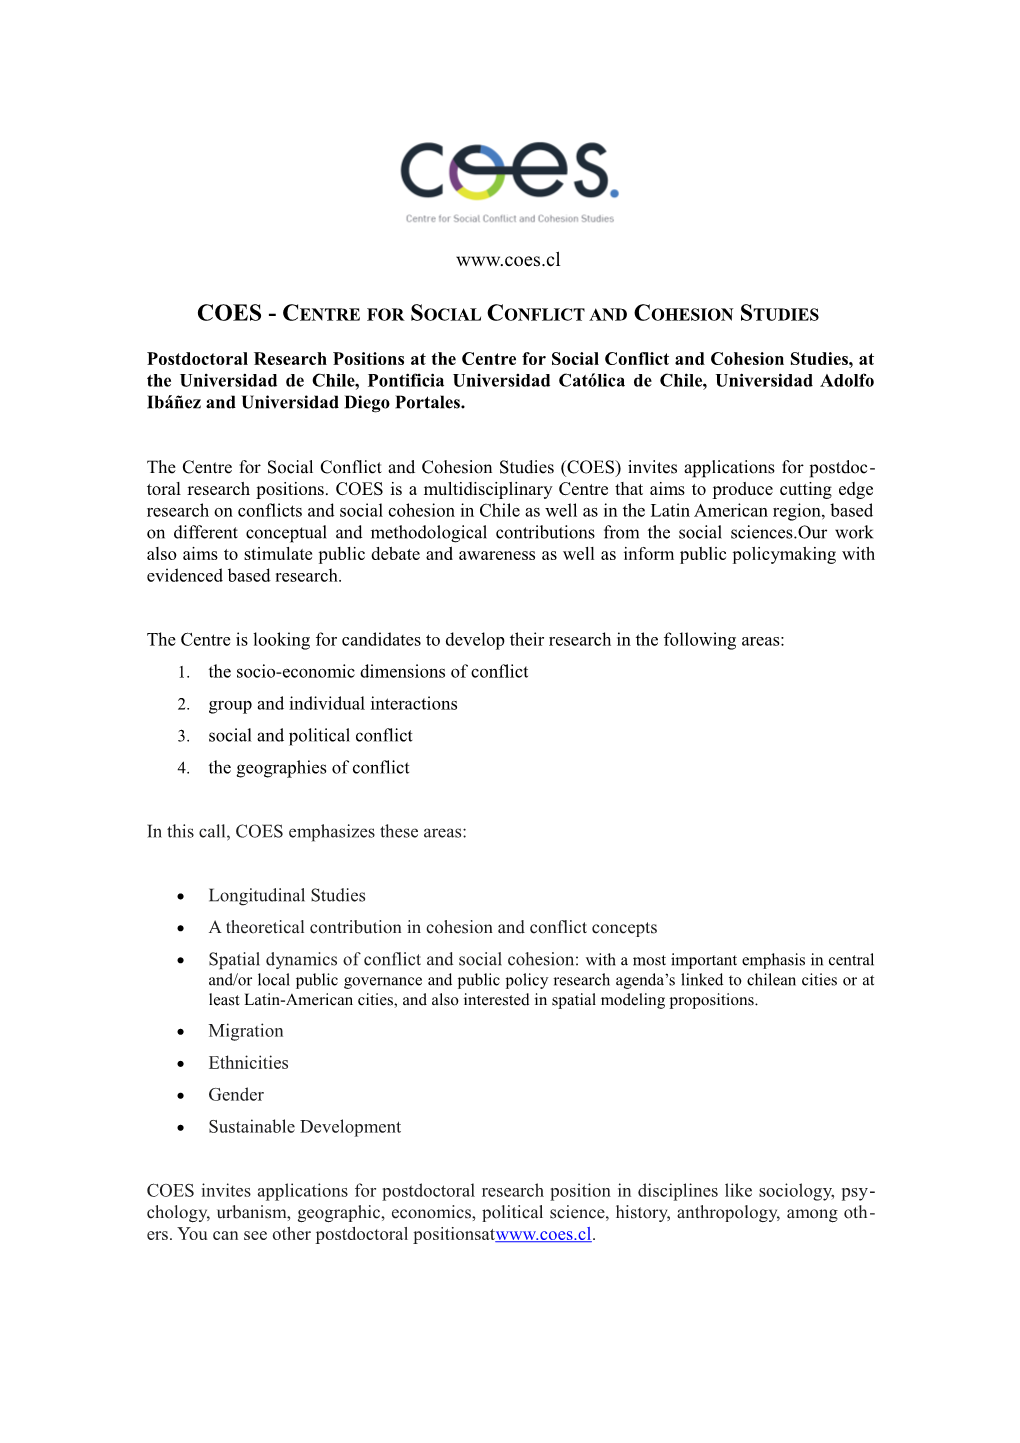 COES - Centre for Social Conflict and Cohesion Studies